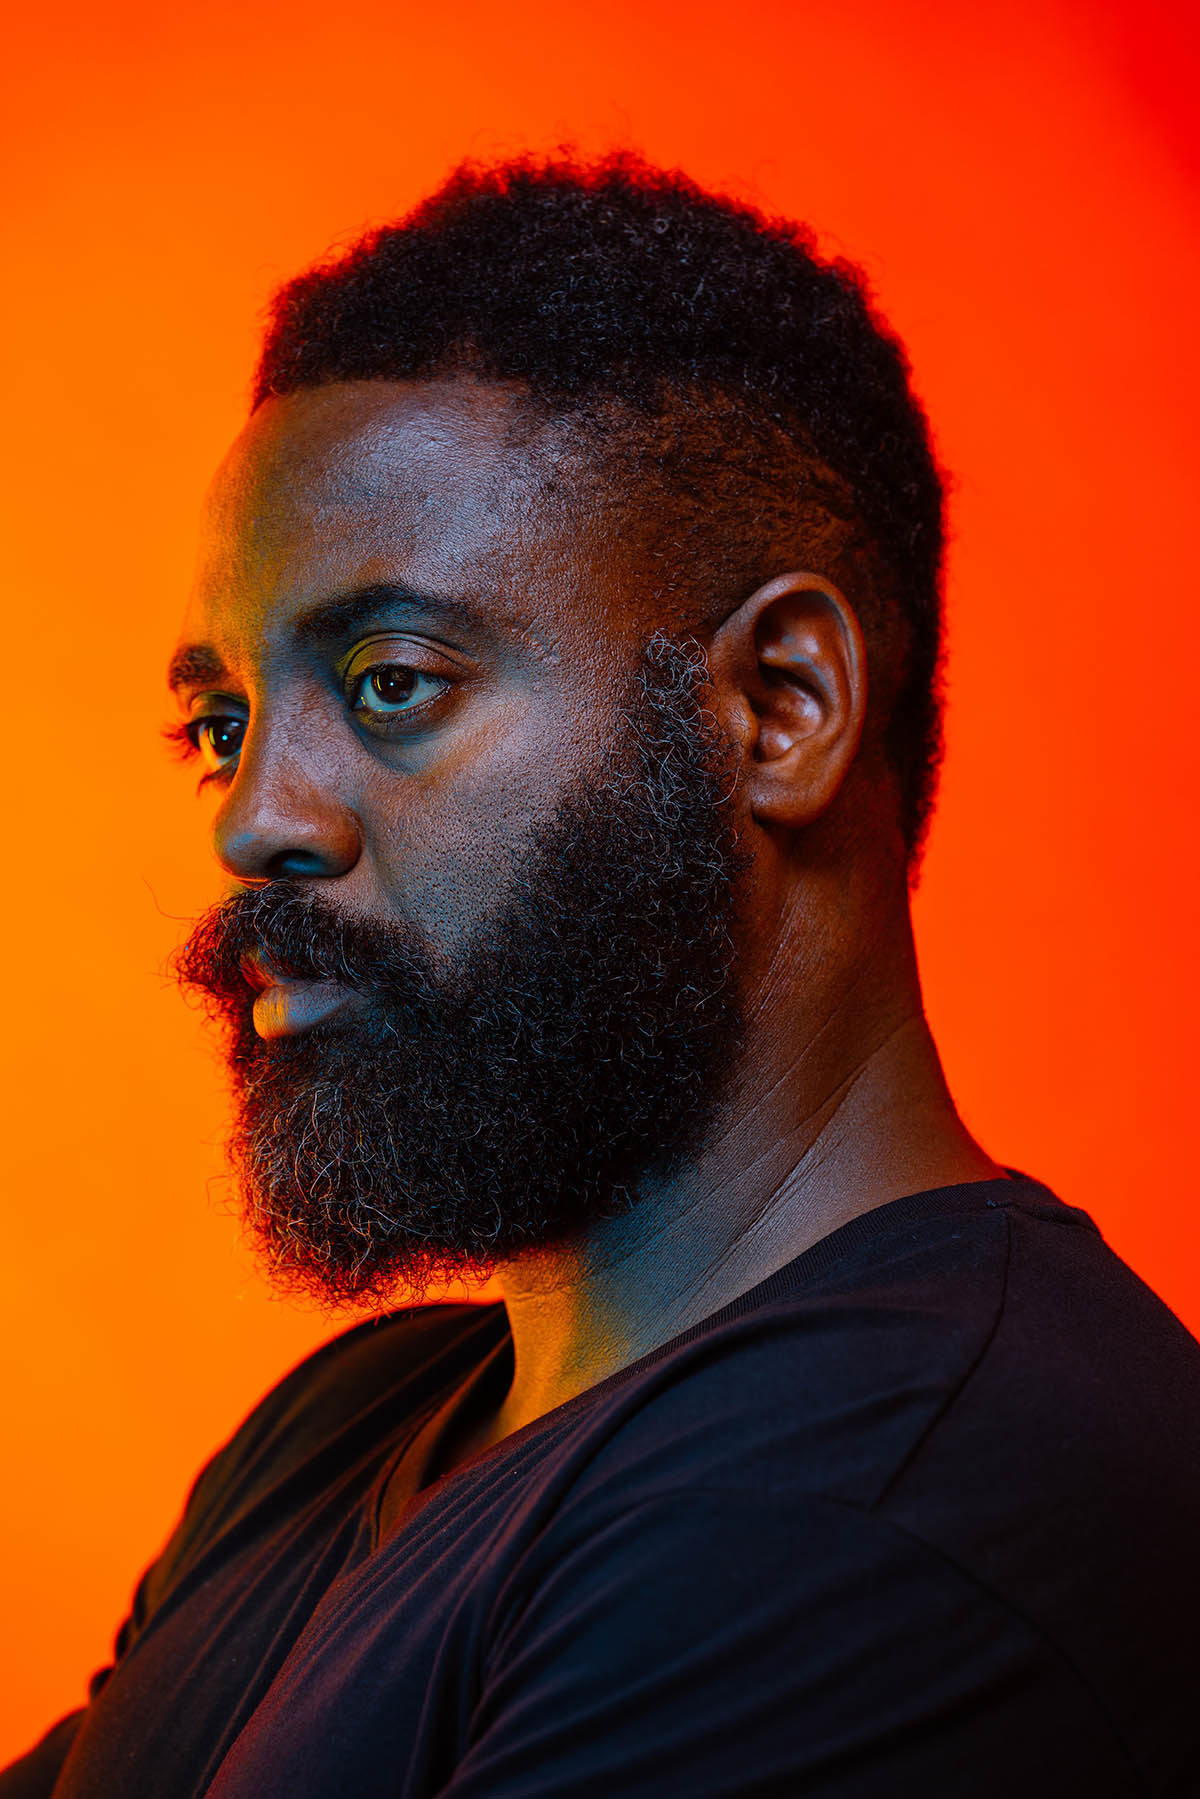 Headshot of Reginald Dwayne Betts, who wears a black shirt and stands in front of a bright orange background.